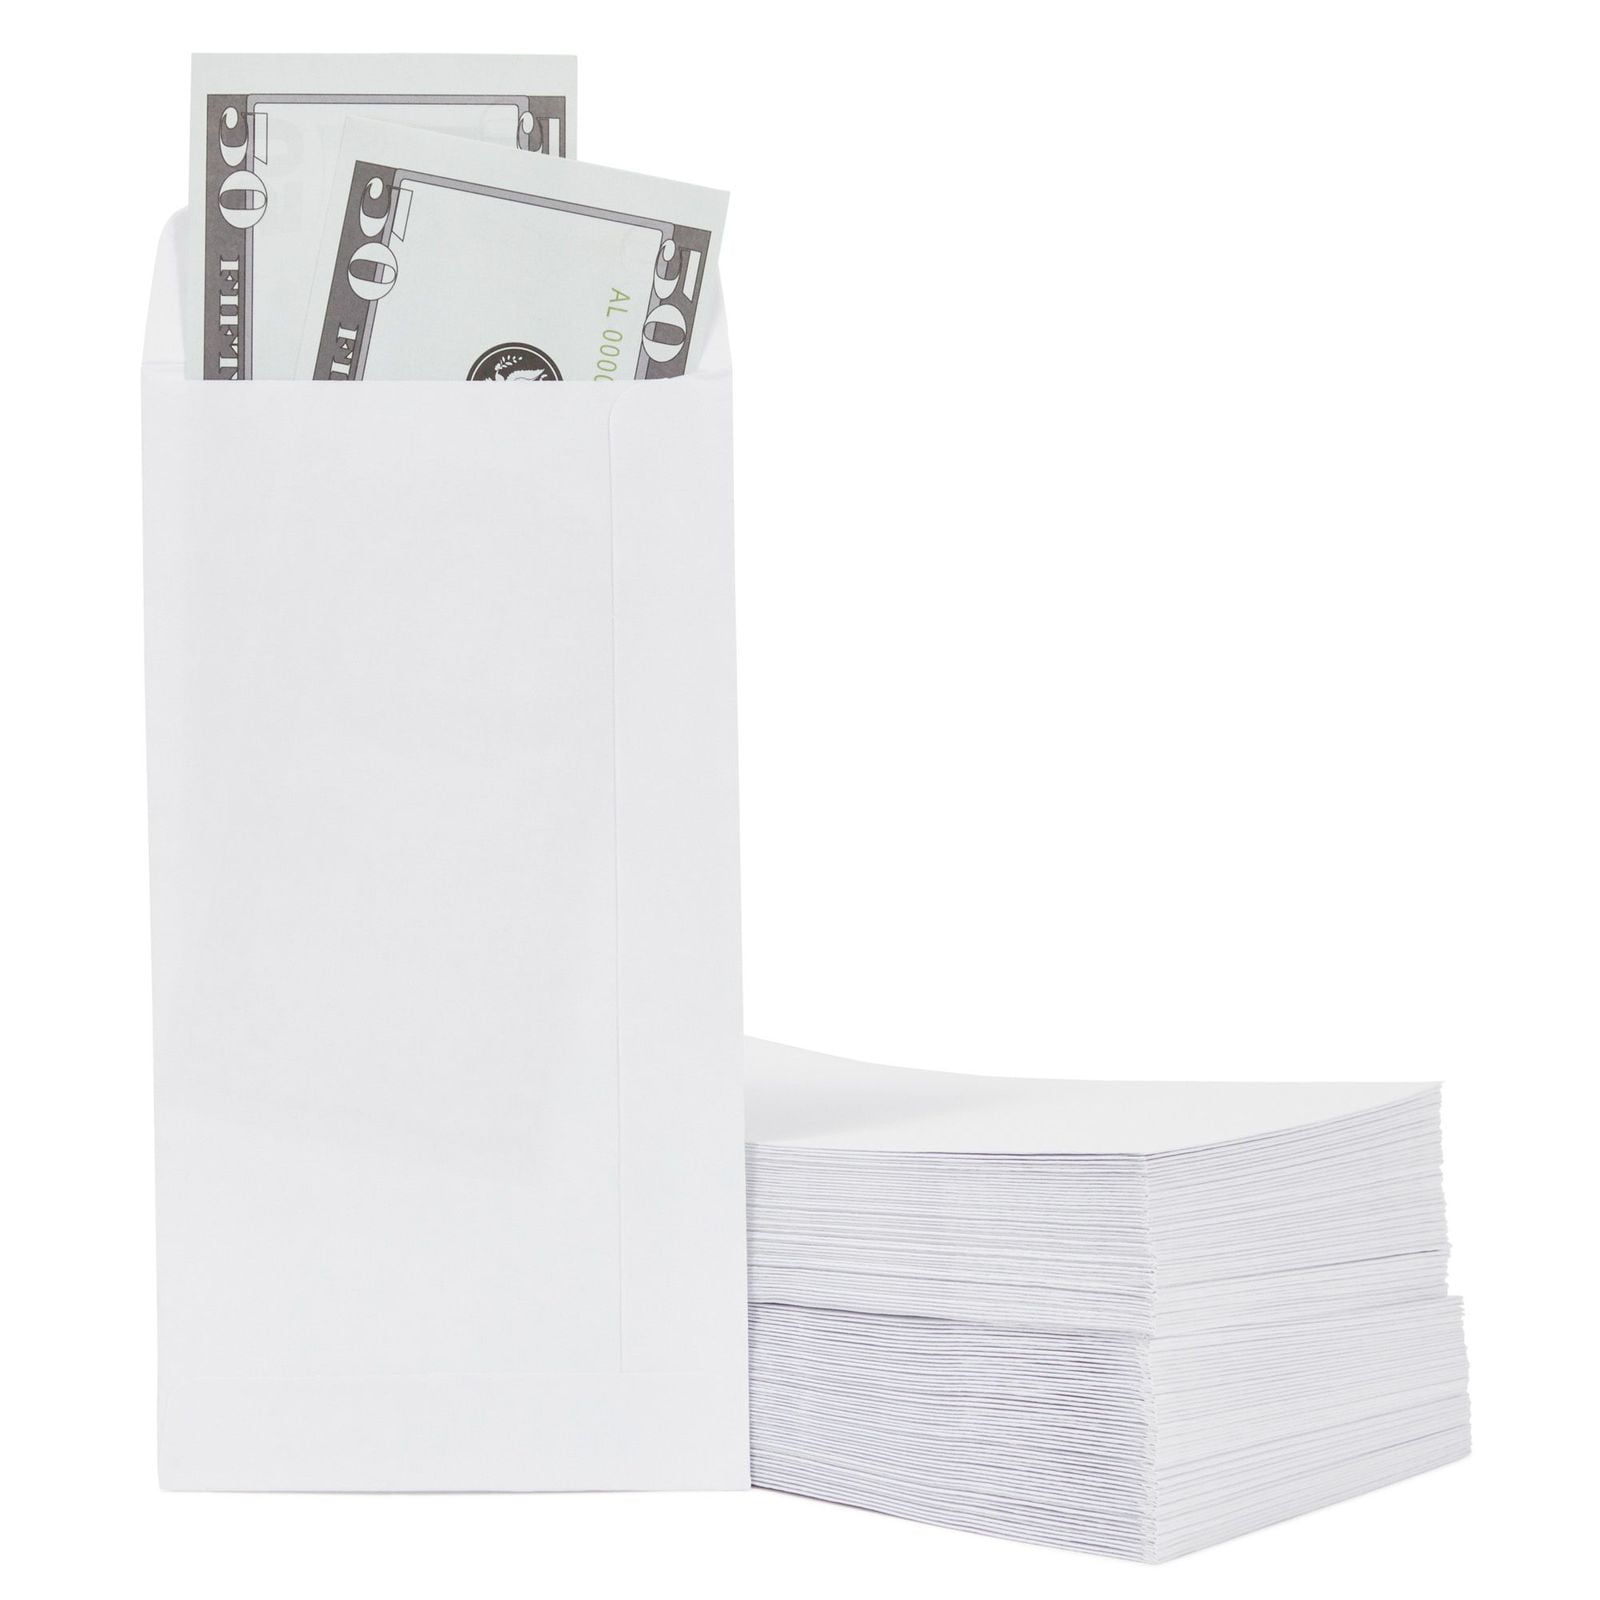 50 Small Dollar 2x2 White Paper Coin Holder Envelope GUARDHOUSE Sulpher Free 